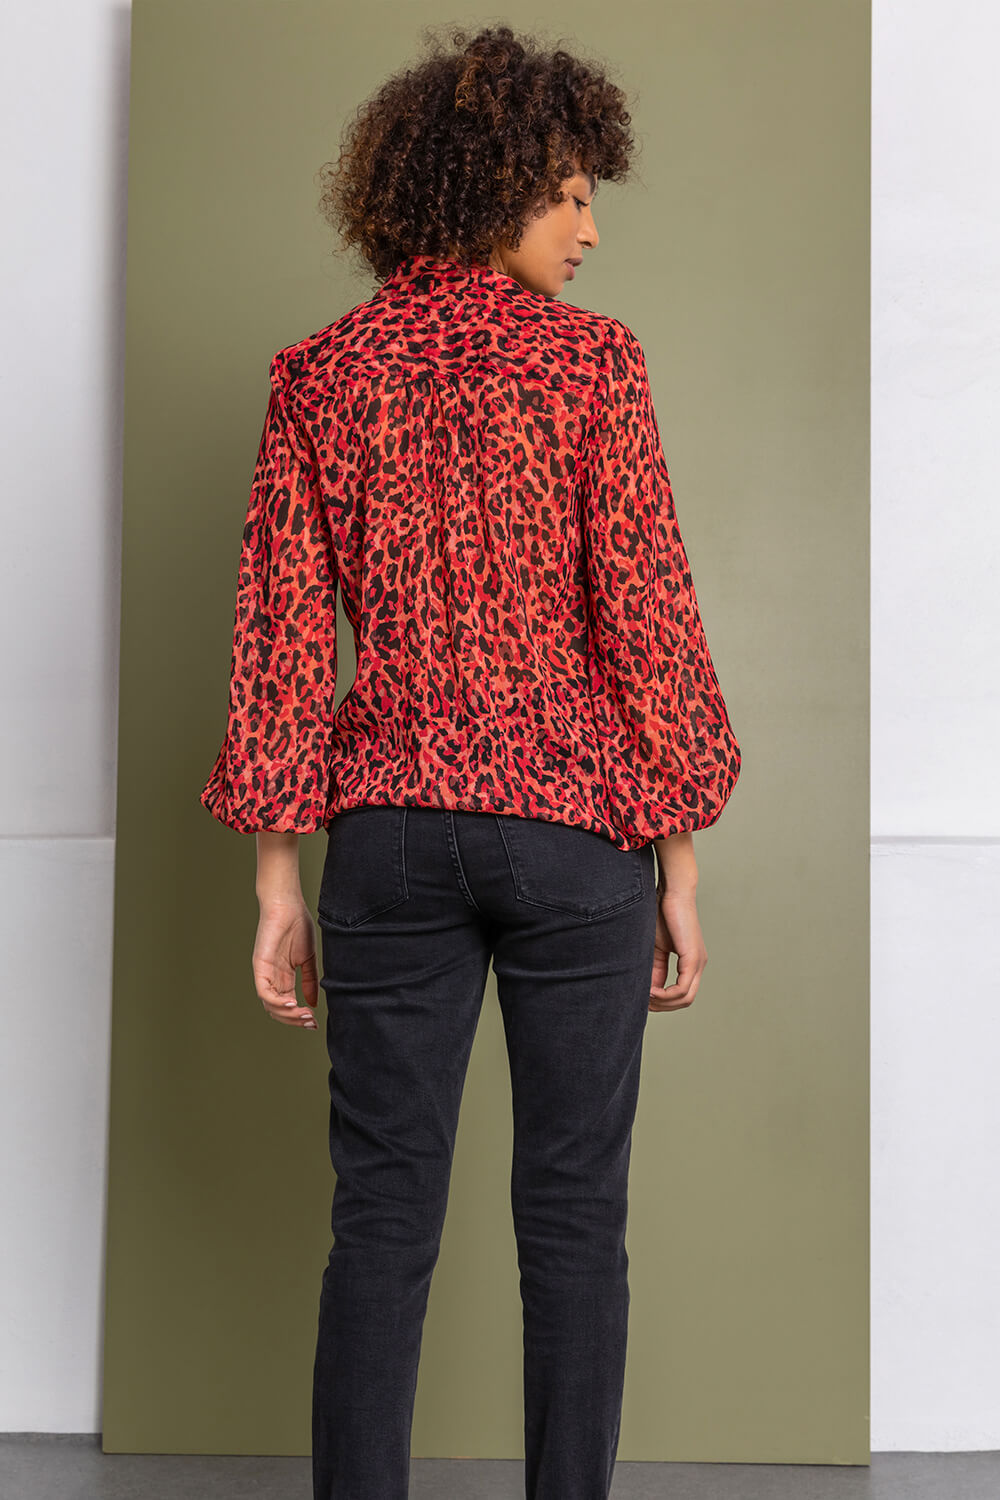 Red Animal Tie Detail Chiffon Blouse, Image 2 of 5